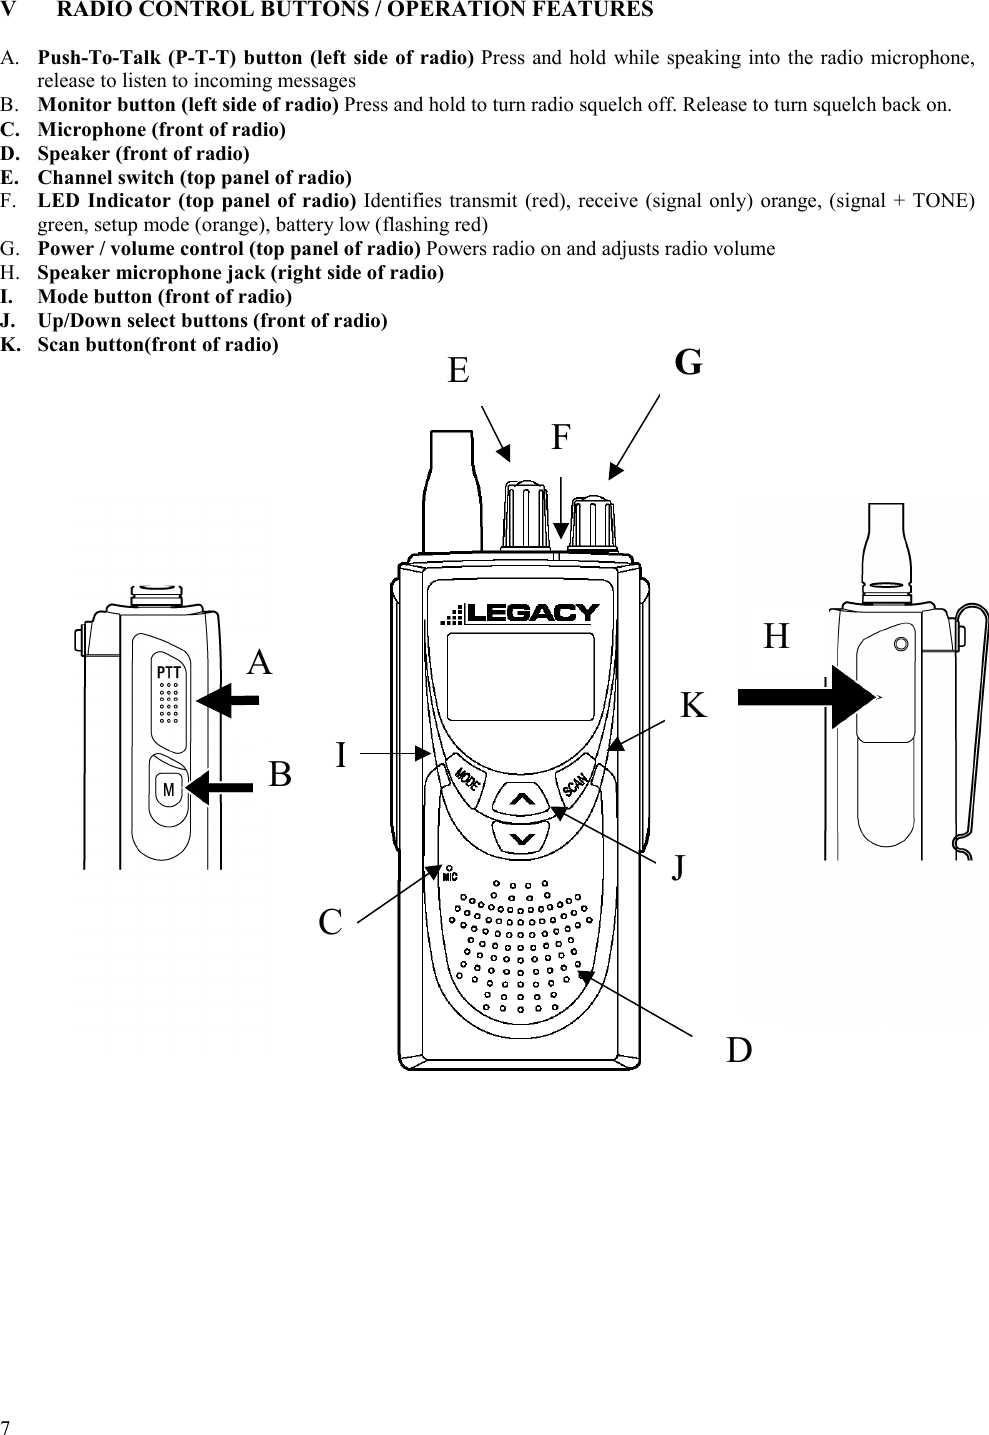  7   V  RADIO CONTROL BUTTONS / OPERATION FEATURES  A.  Push-To-Talk (P-T-T) button (left side of radio) Press and hold while speaking into the radio microphone, release to listen to incoming messages B.  Monitor button (left side of radio) Press and hold to turn radio squelch off. Release to turn squelch back on. C.  Microphone (front of radio) D.  Speaker (front of radio) E.  Channel switch (top panel of radio)   F.  LED Indicator (top panel of radio) Identifies transmit (red), receive (signal only) orange, (signal + TONE) green, setup mode (orange), battery low (flashing red)  G.  Power / volume control (top panel of radio) Powers radio on and adjusts radio volume H.  Speaker microphone jack (right side of radio)  I.  Mode button (front of radio) J.  Up/Down select buttons (front of radio) K.  Scan button(front of radio)                                              H B A CD IJ K F E  G 